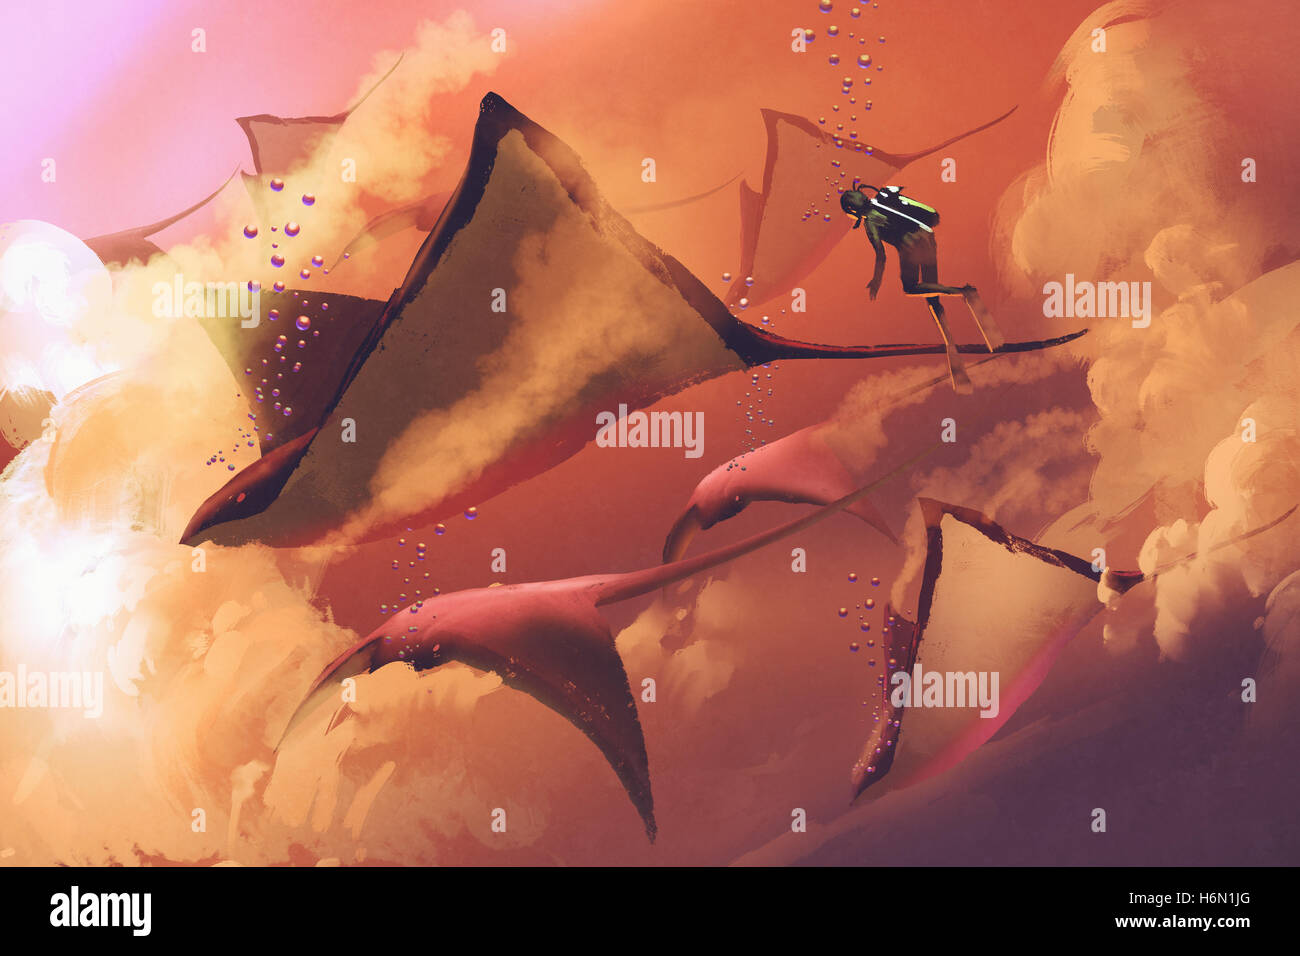 surreal world concept showing diver and manta rays flying in the cloudy sky,illustration painting Stock Photo